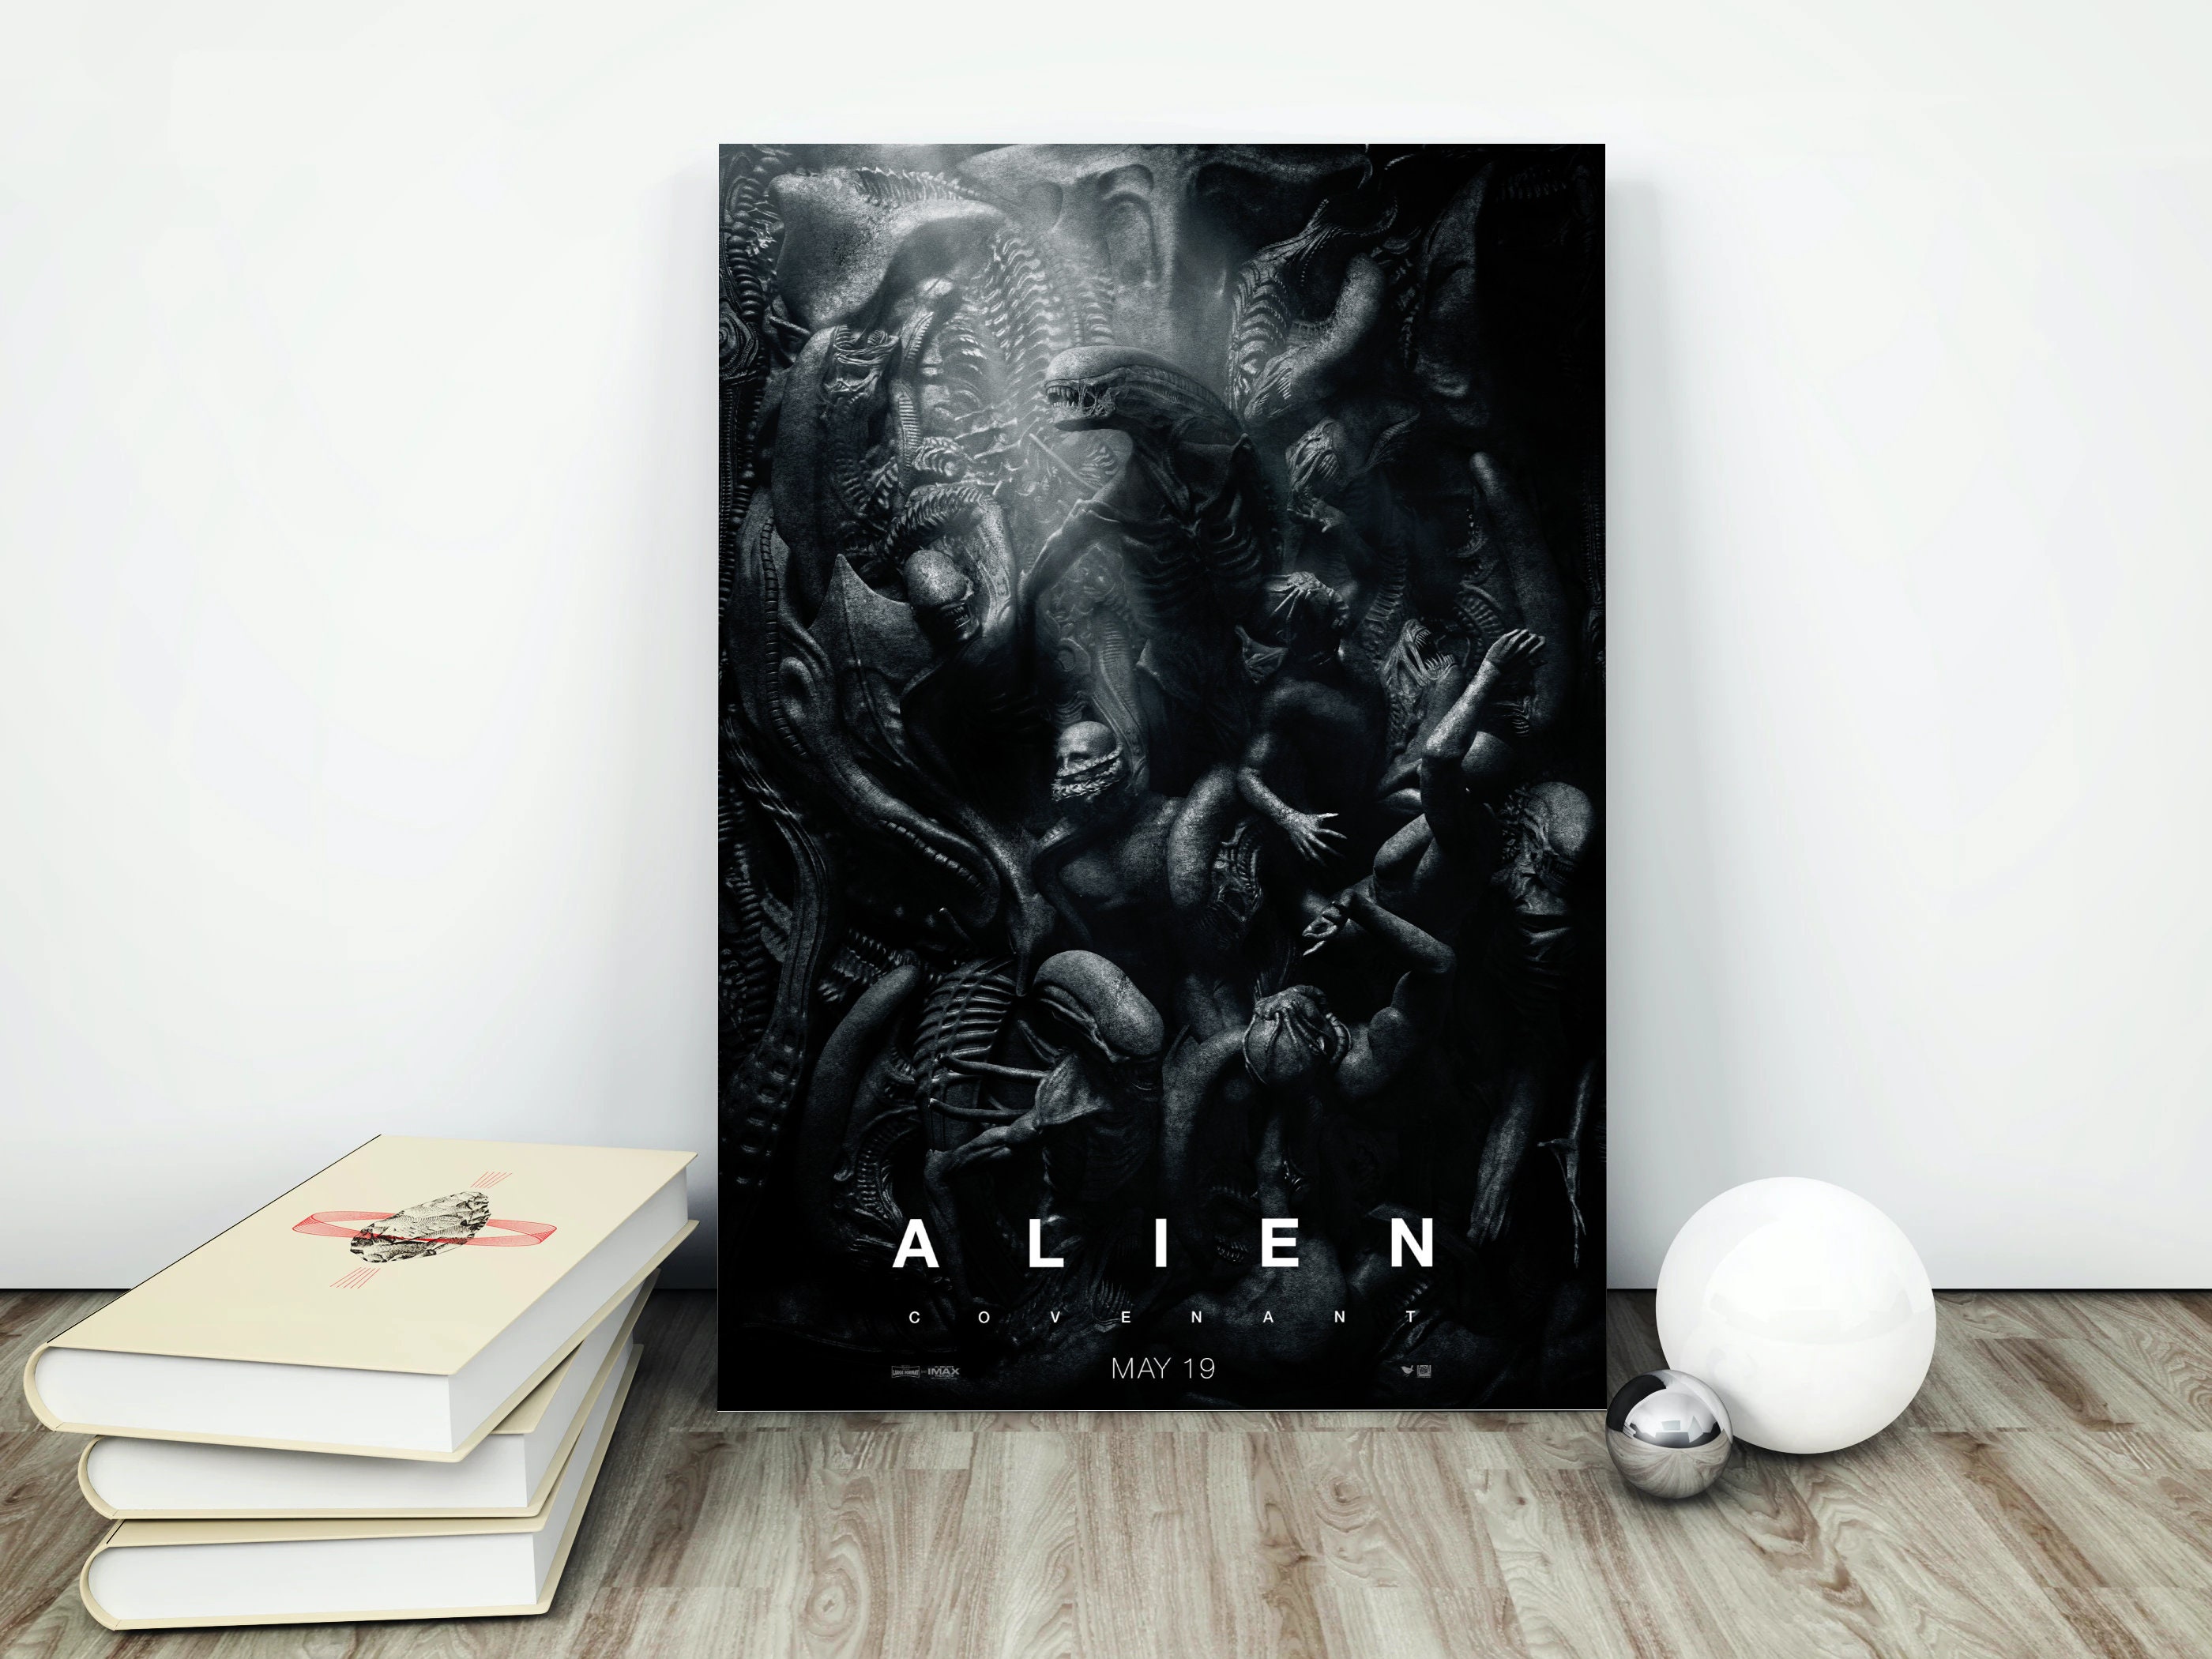 Alien movie poster Covenant instant download movie poster | Etsy